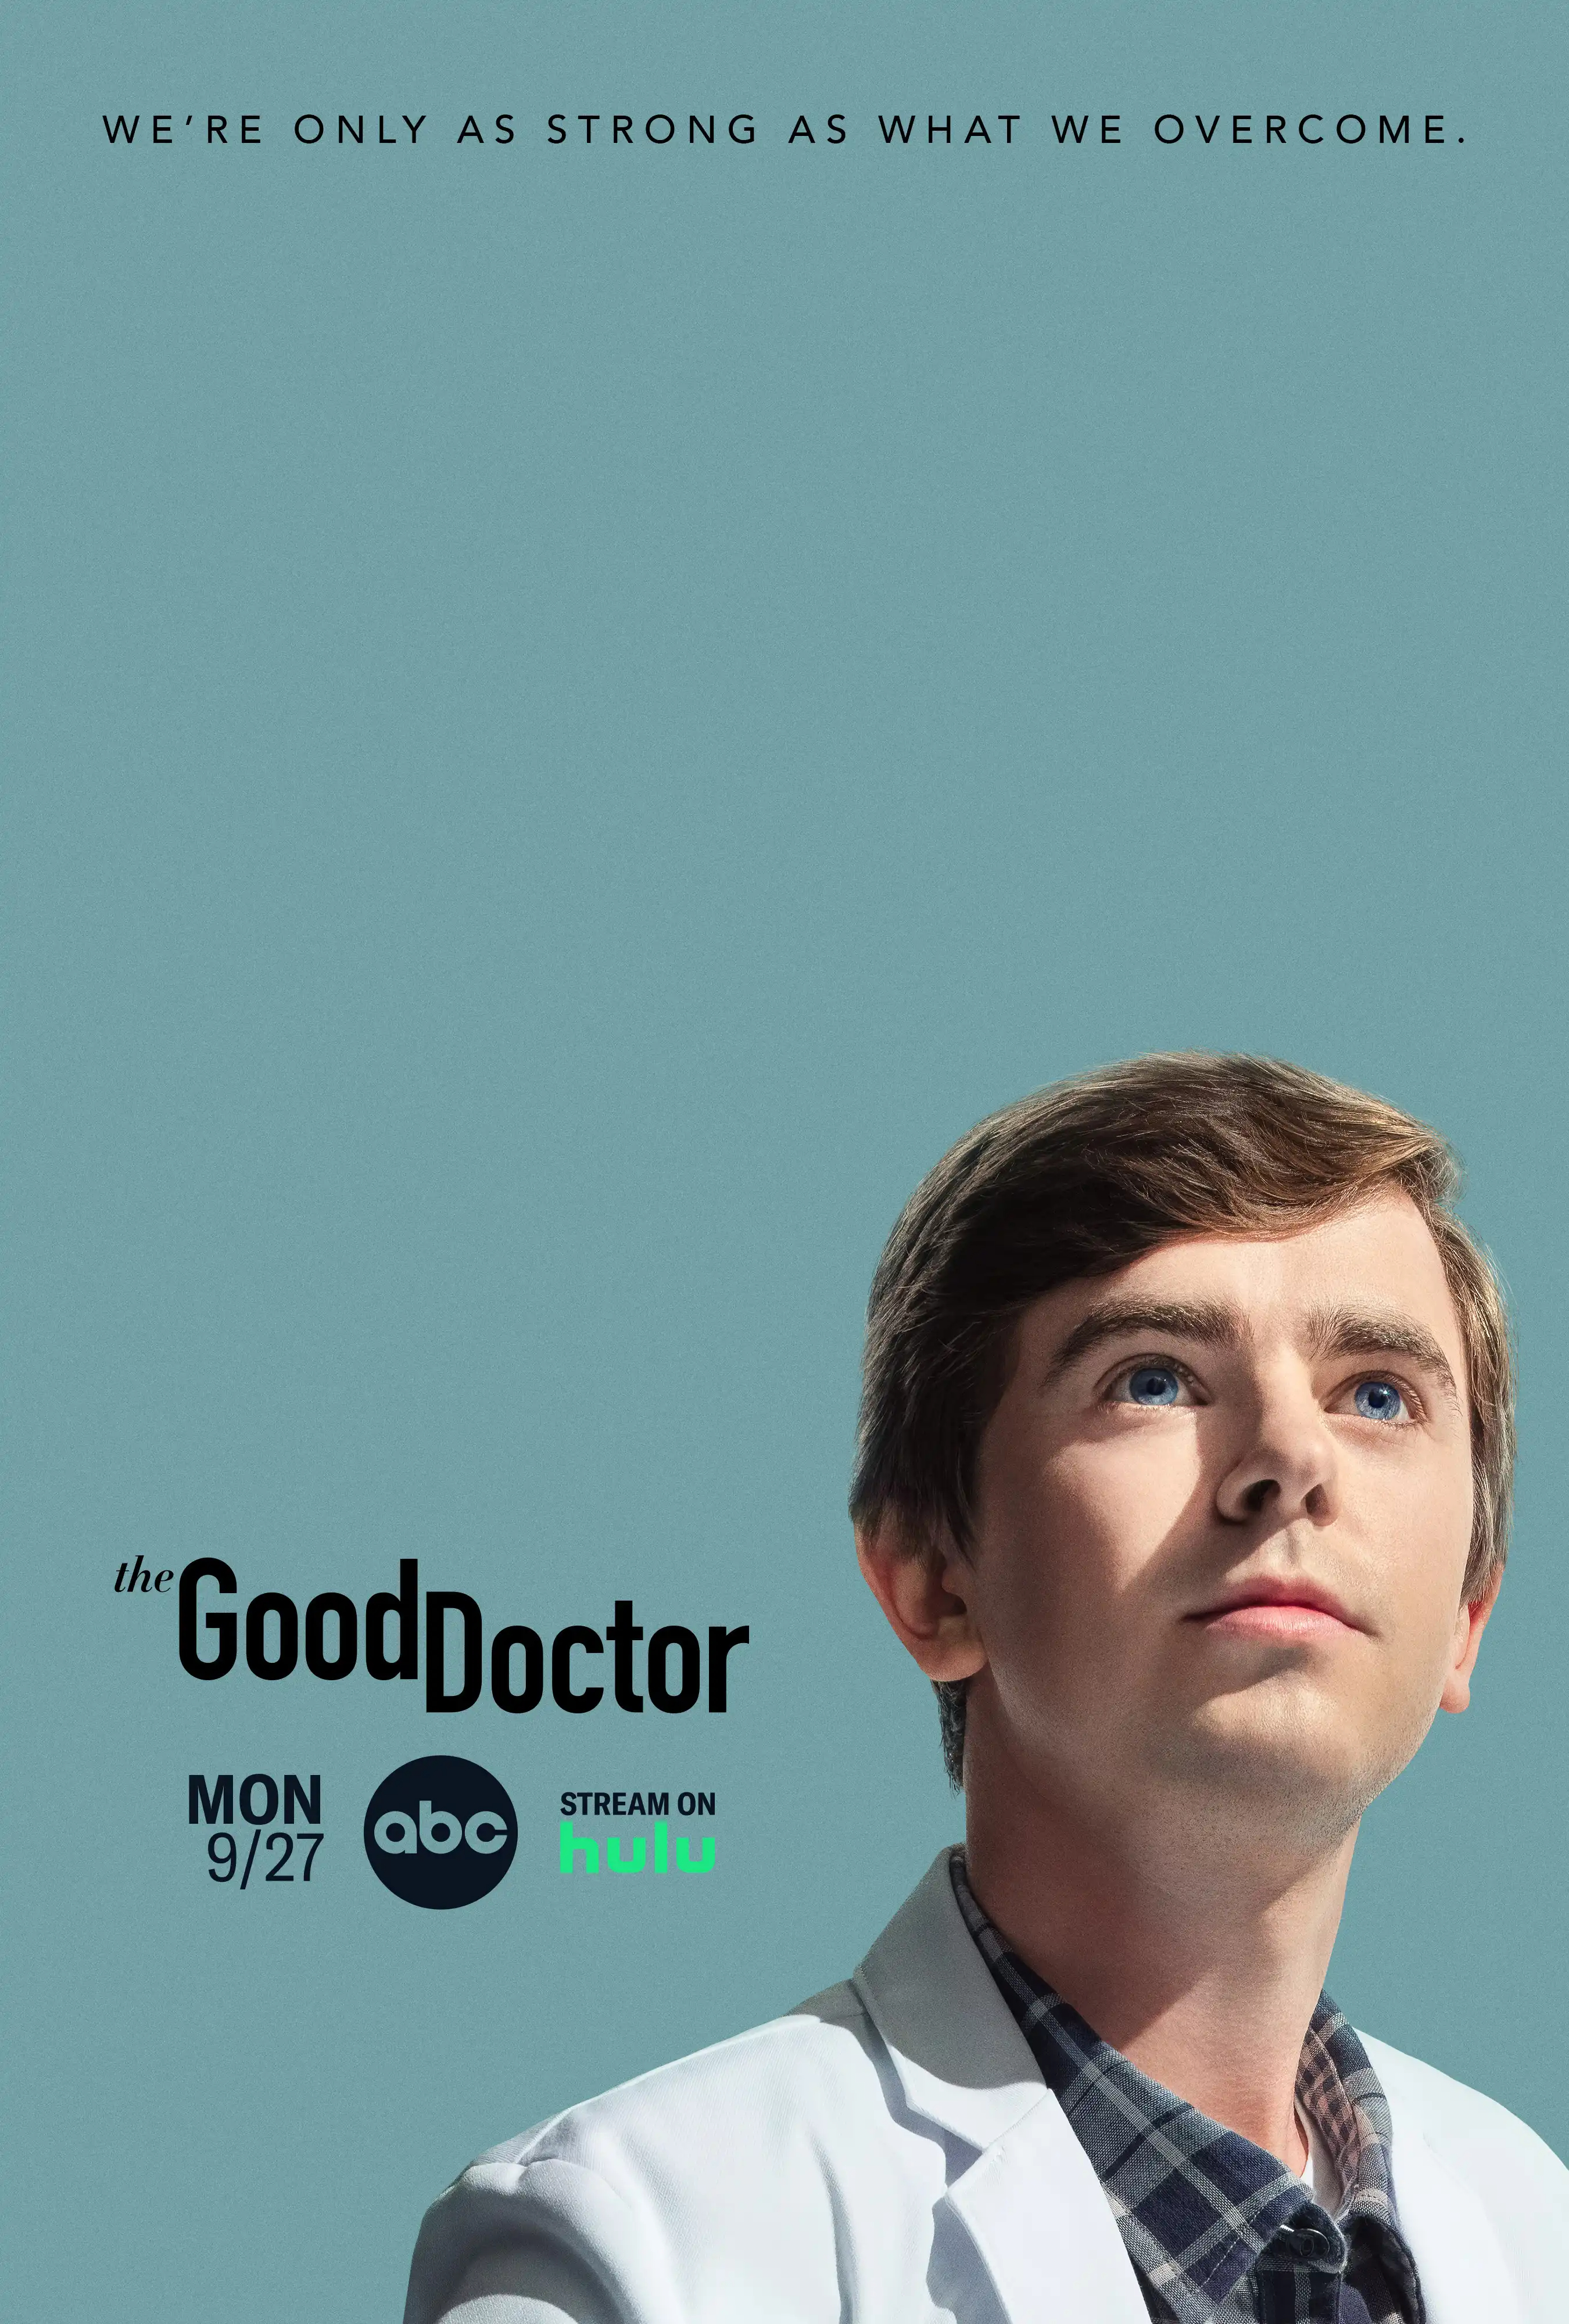 The Good Doctor S05E01 VOSTFR HDTV